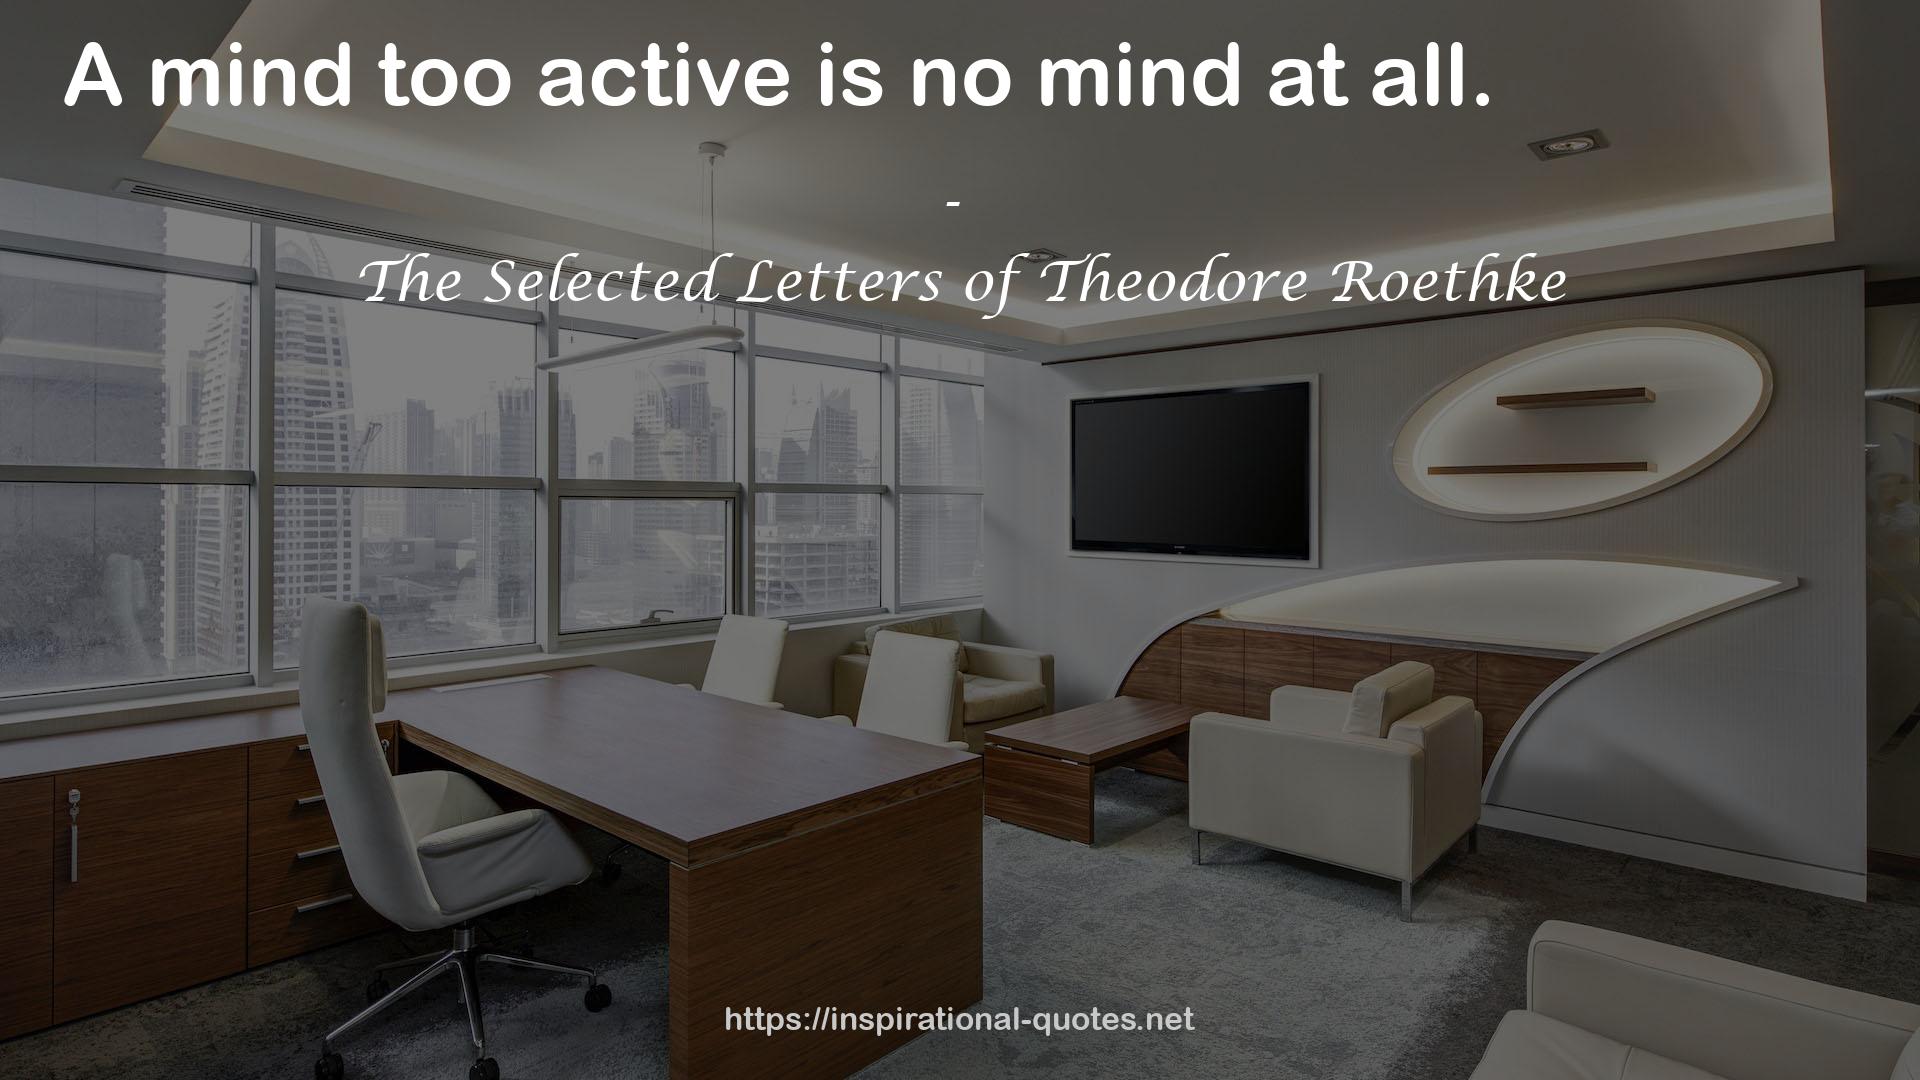 The Selected Letters of Theodore Roethke QUOTES